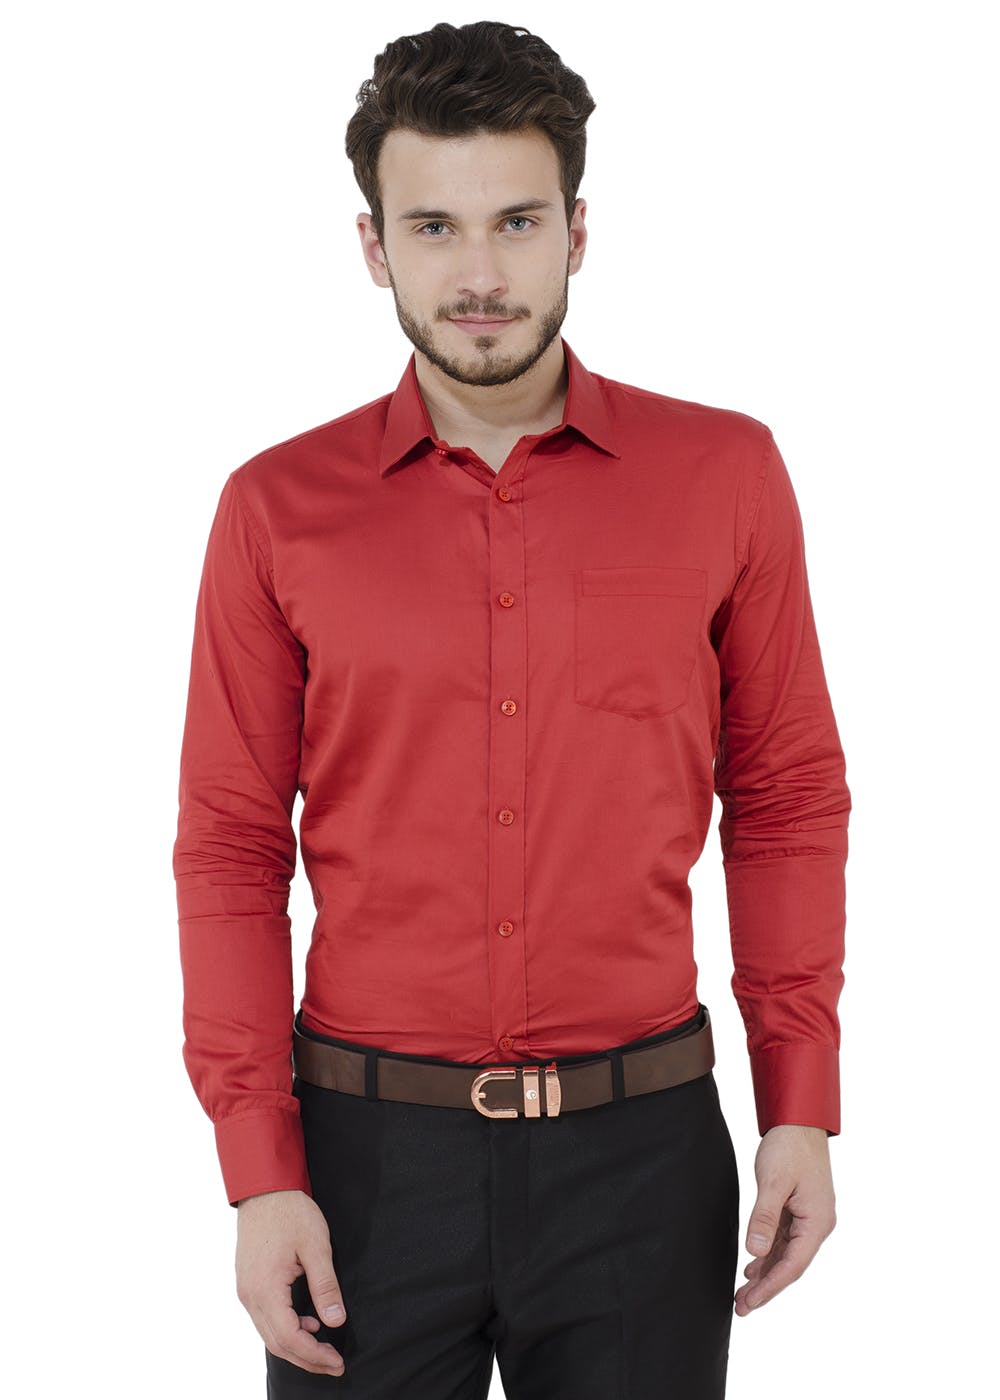 Get Solid Red Formal Full Sleeves Shirt at ₹ 799 | LBB Shop